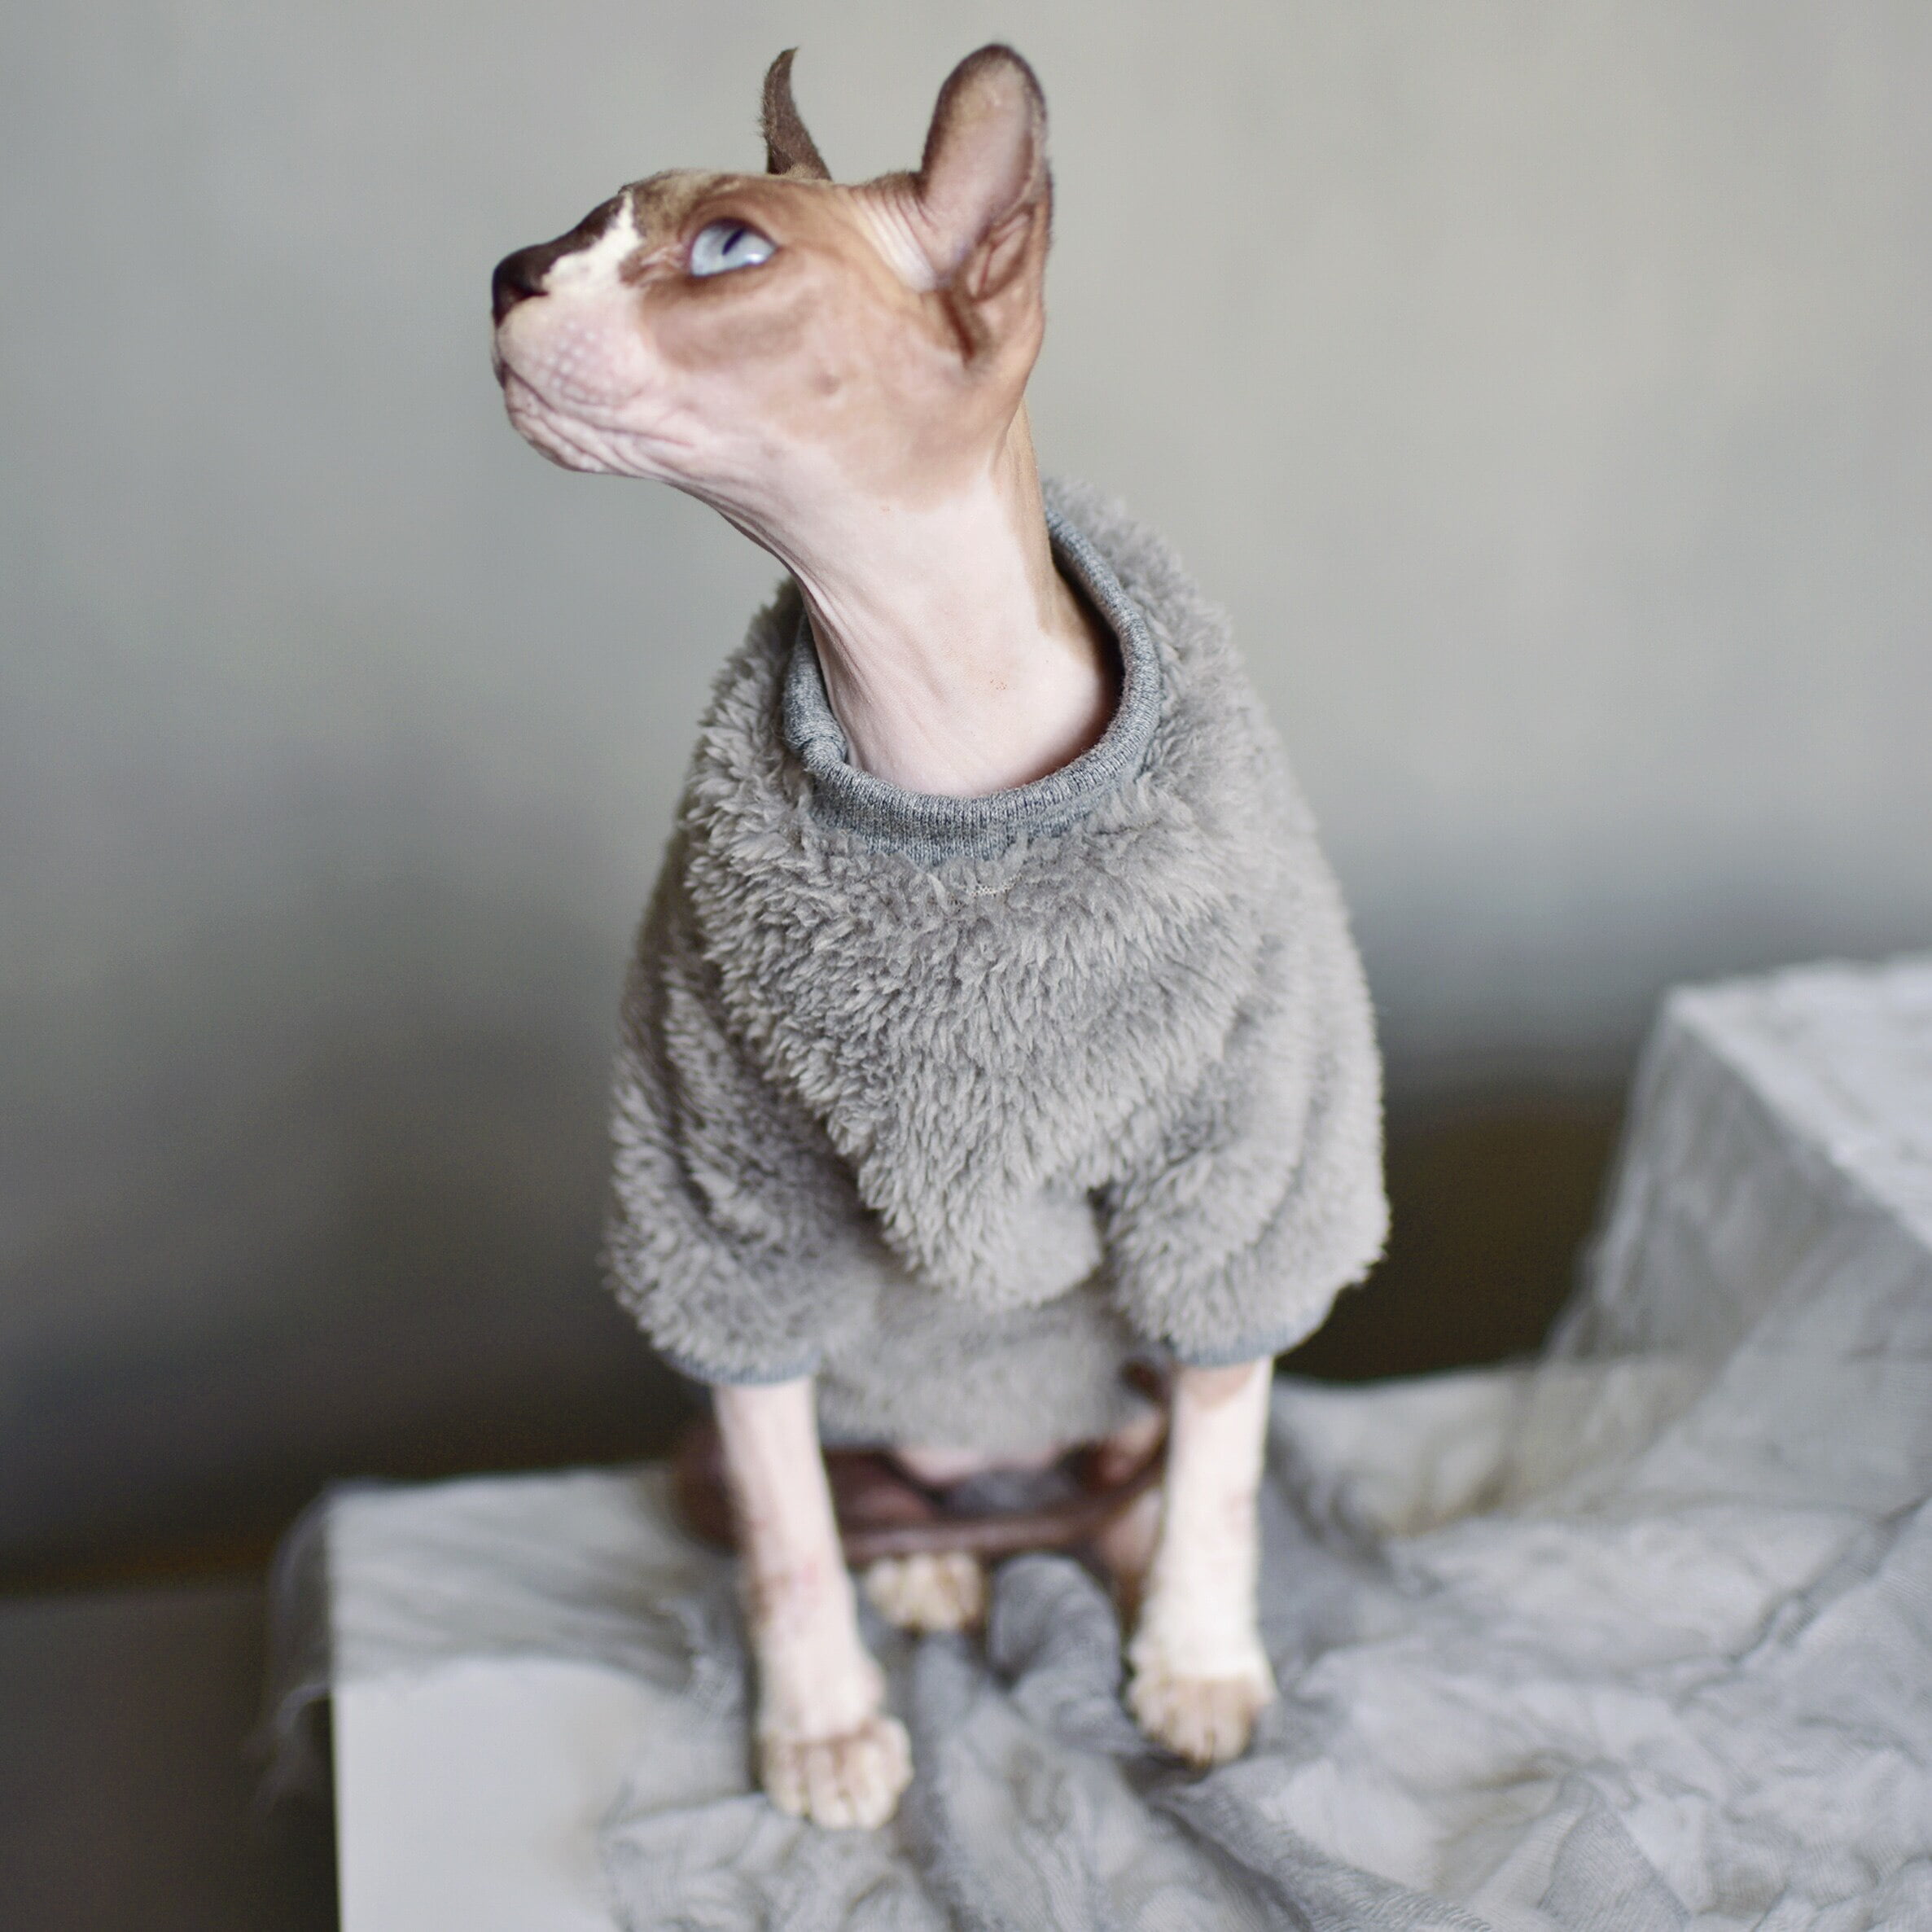 Sphynx cat clothes Sweater for cat.Jumpsuit for cat .Hairless cat.Soft and warm cloth for any breed of cat Handmade